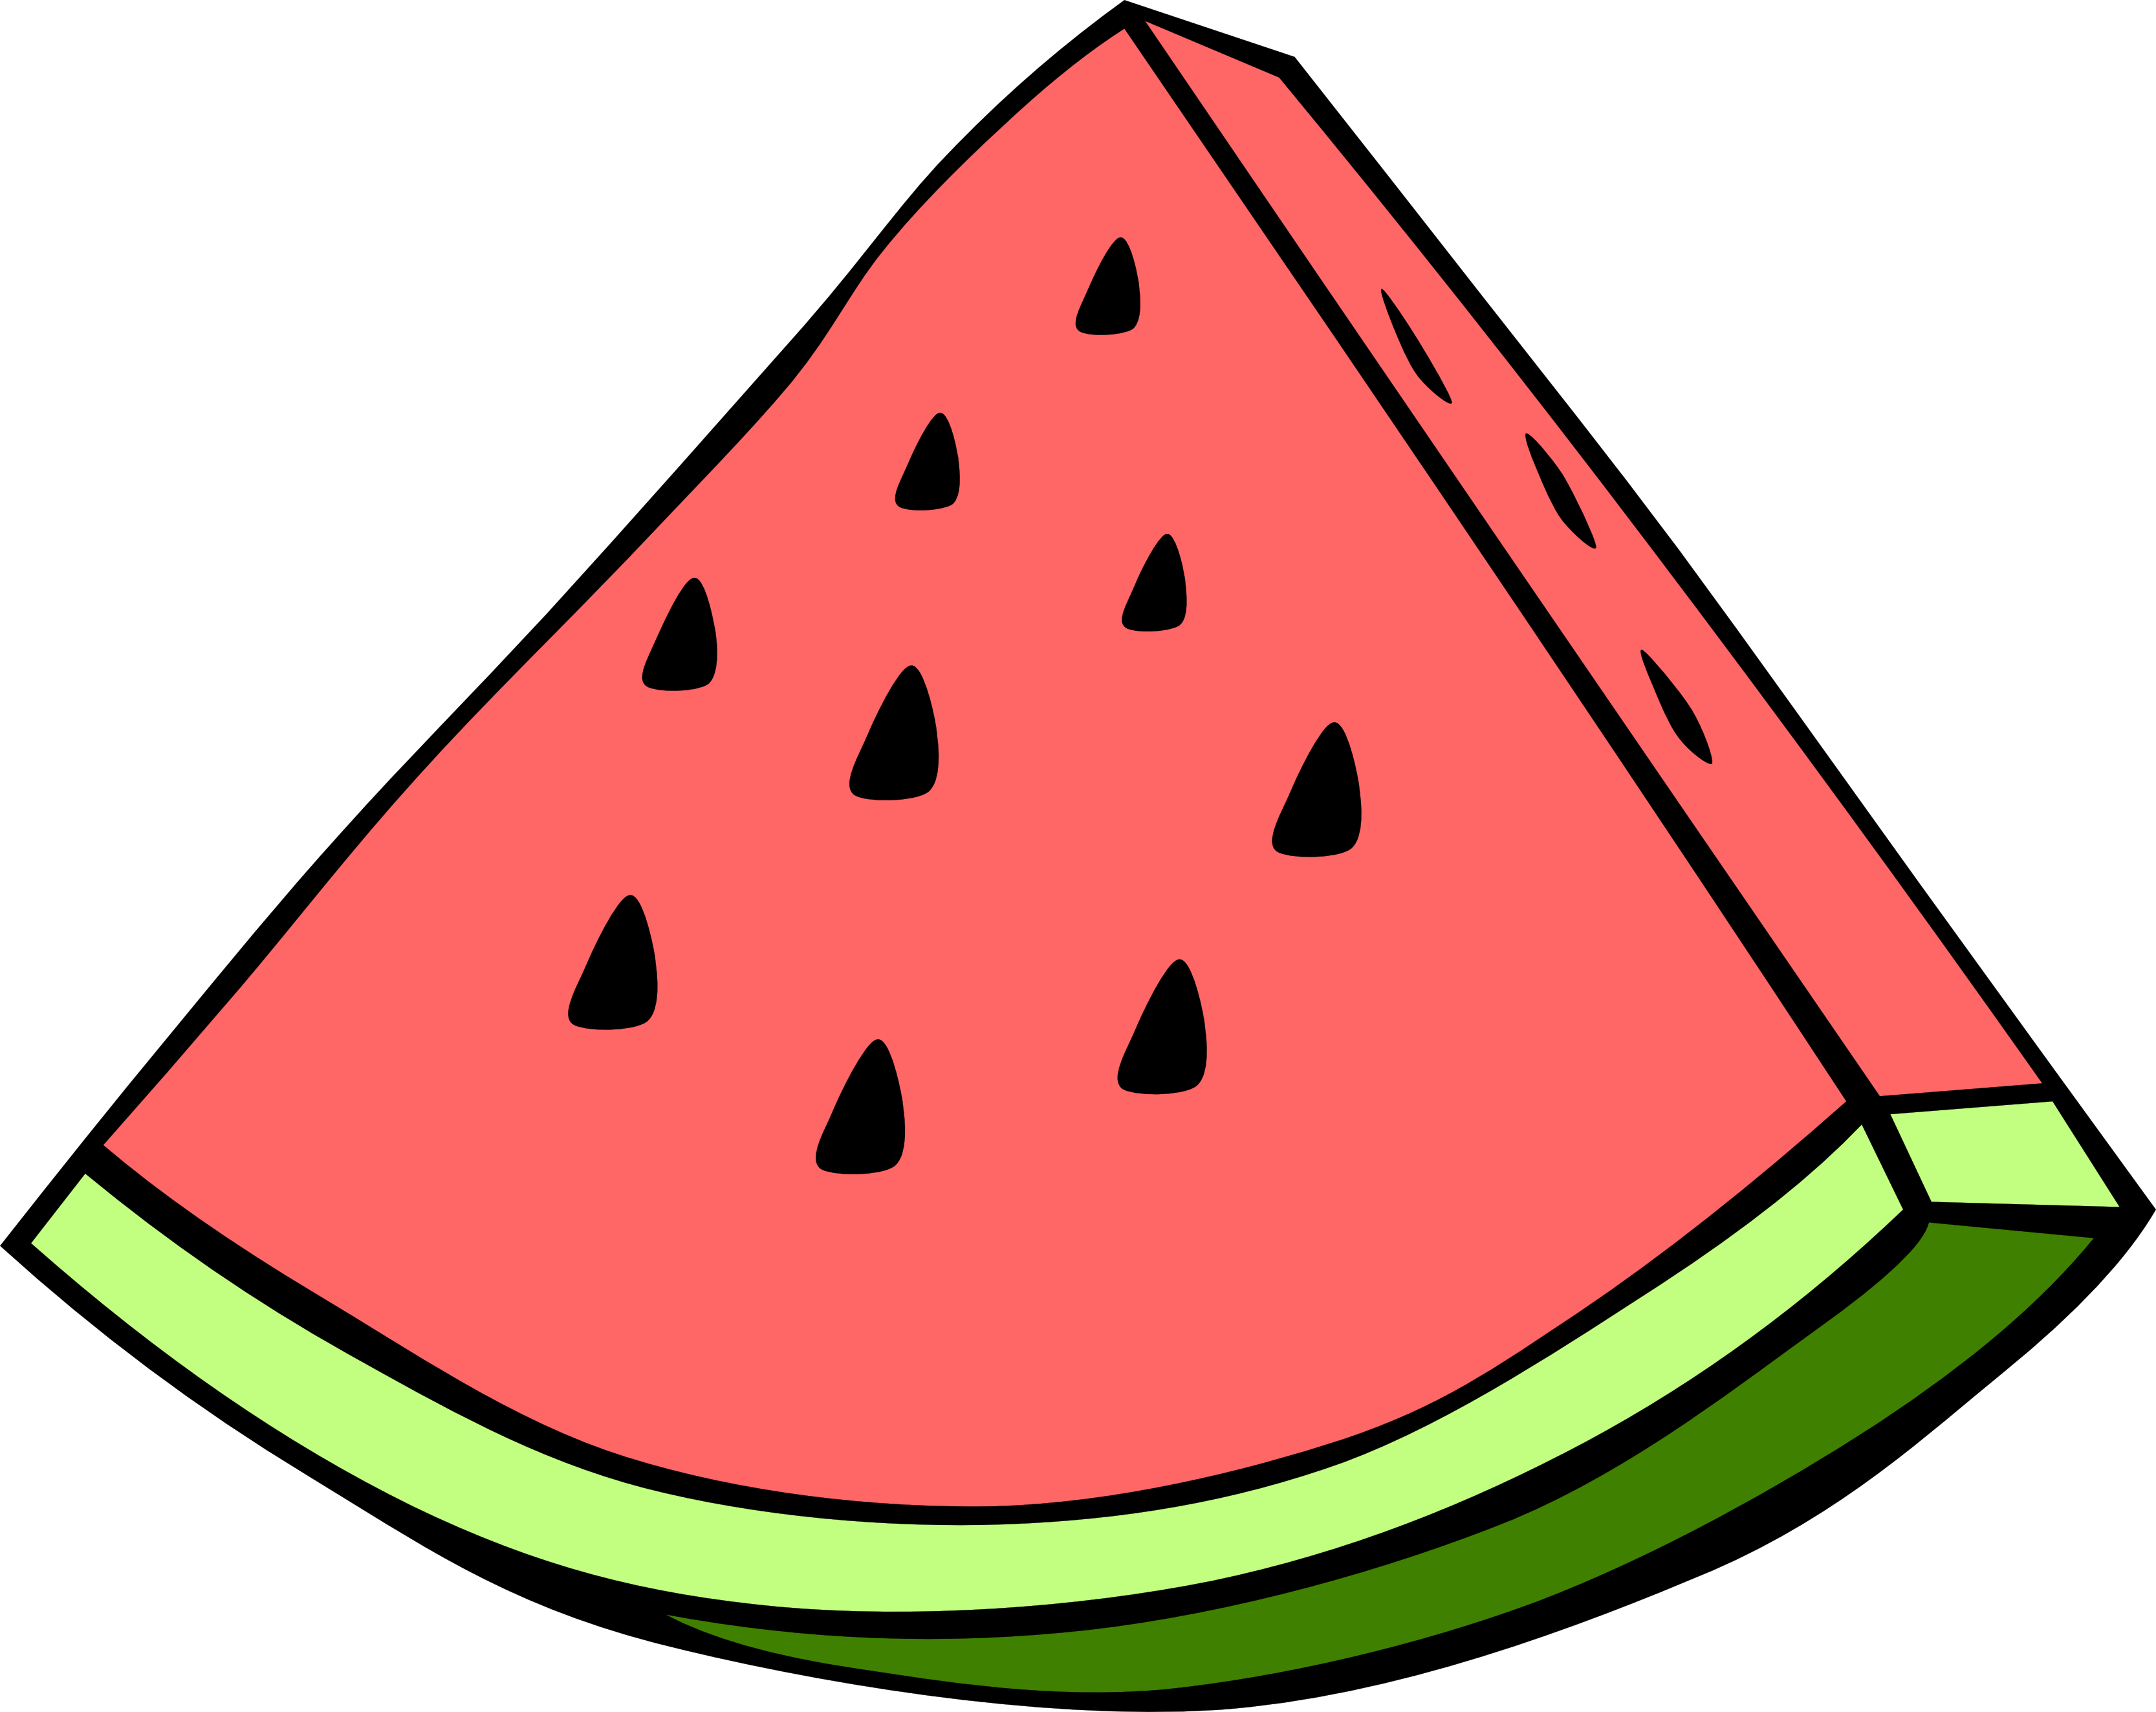 Simple Fruit Watermelon By Gerald G - Watermelon Png (3333x2646)